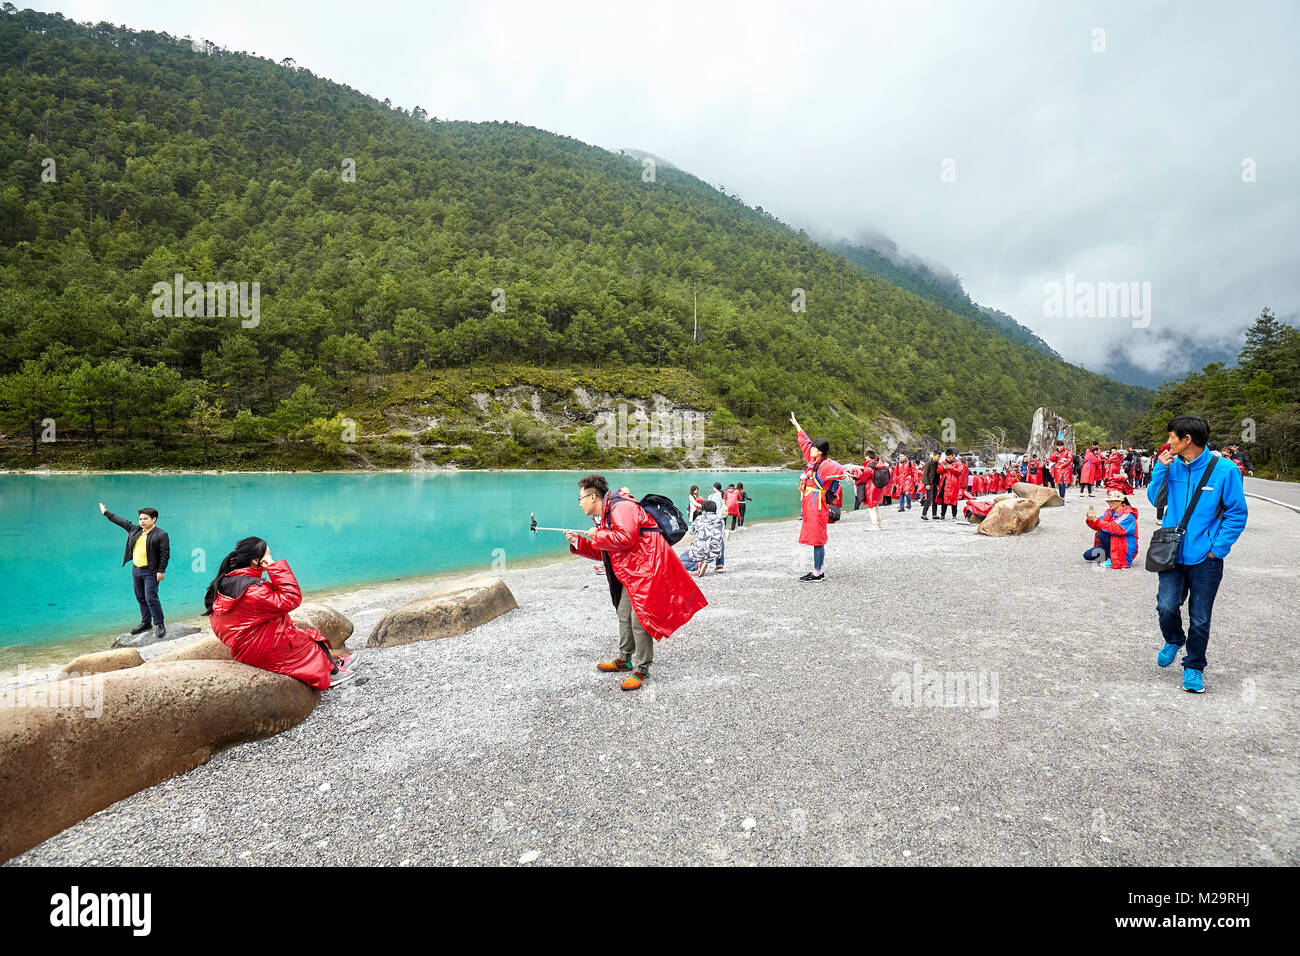 Lijiang, China - September 22, 2017: Tourists at the White Water River in Blue Moon Valley, one of the China top travel destinations. Stock Photo